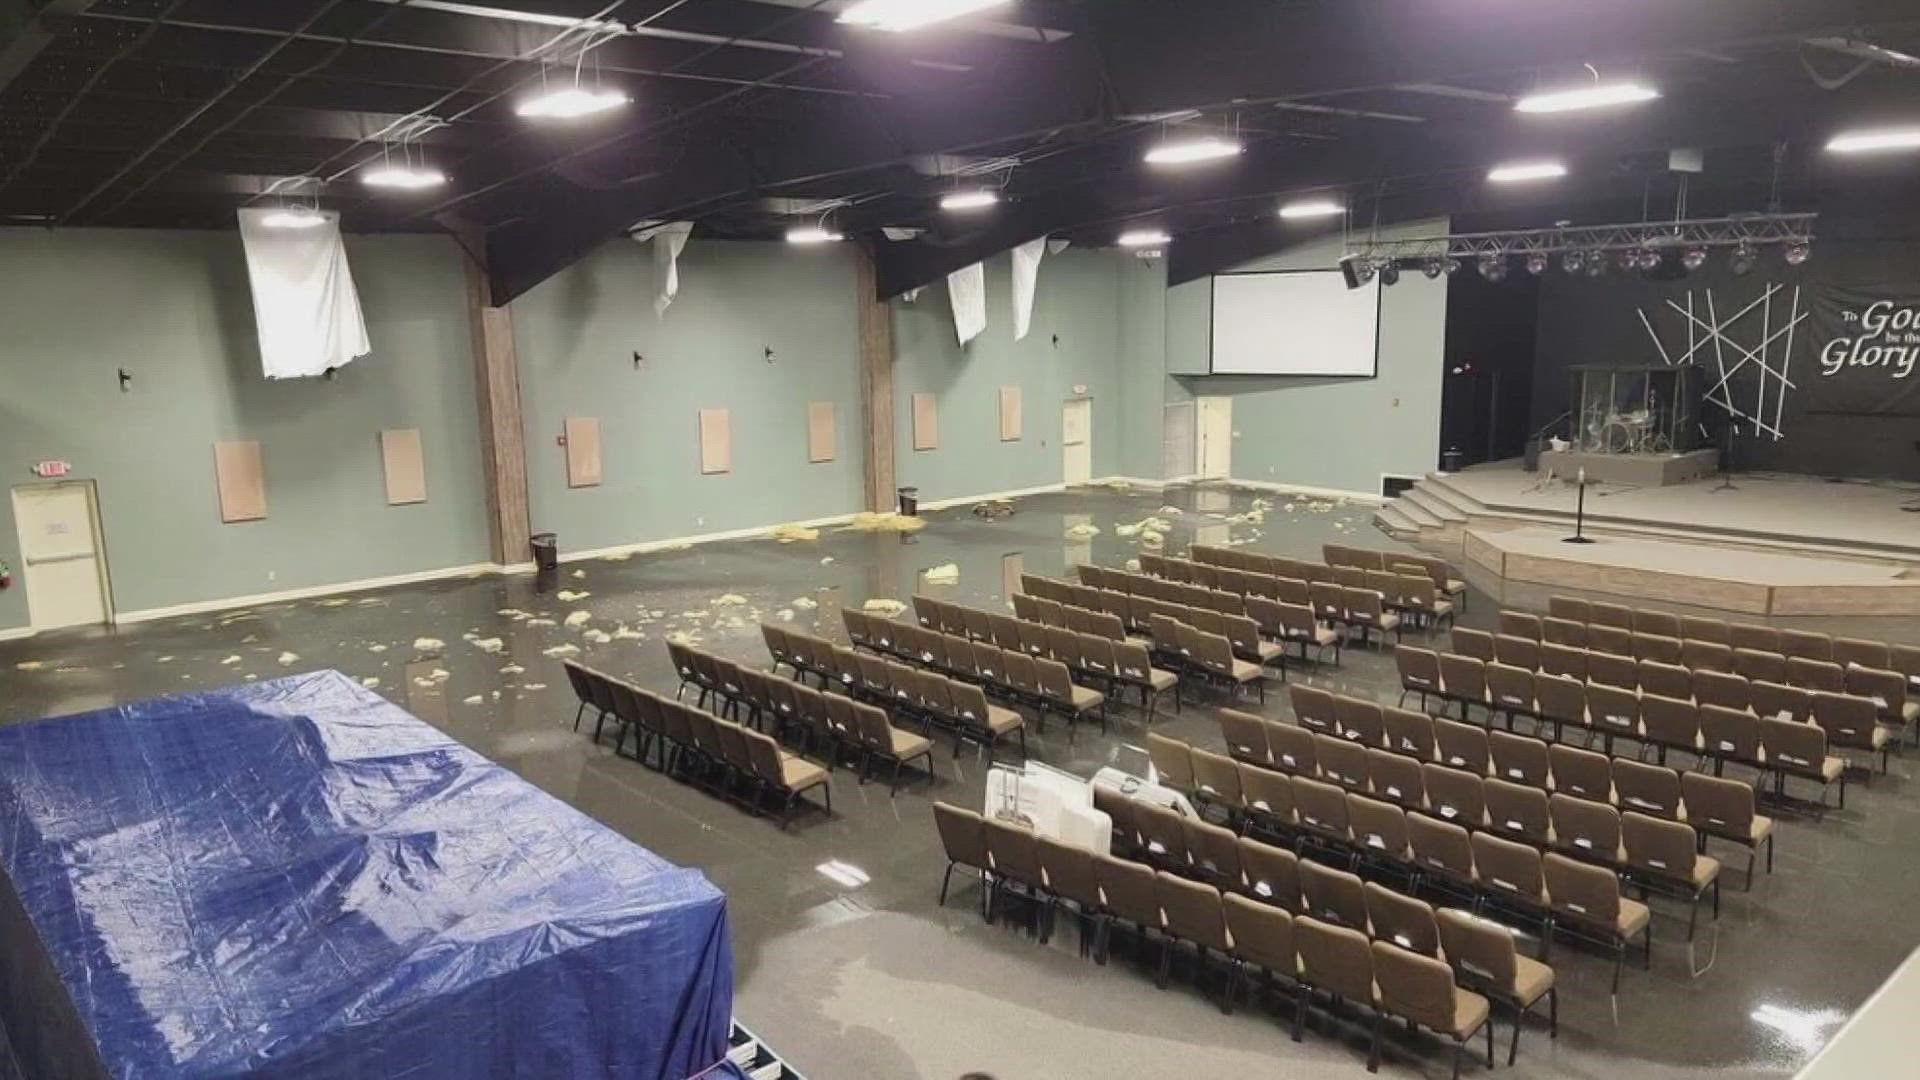 A pastor's faith has not been shaken even after a series of weather events over the years that took aim at his church.